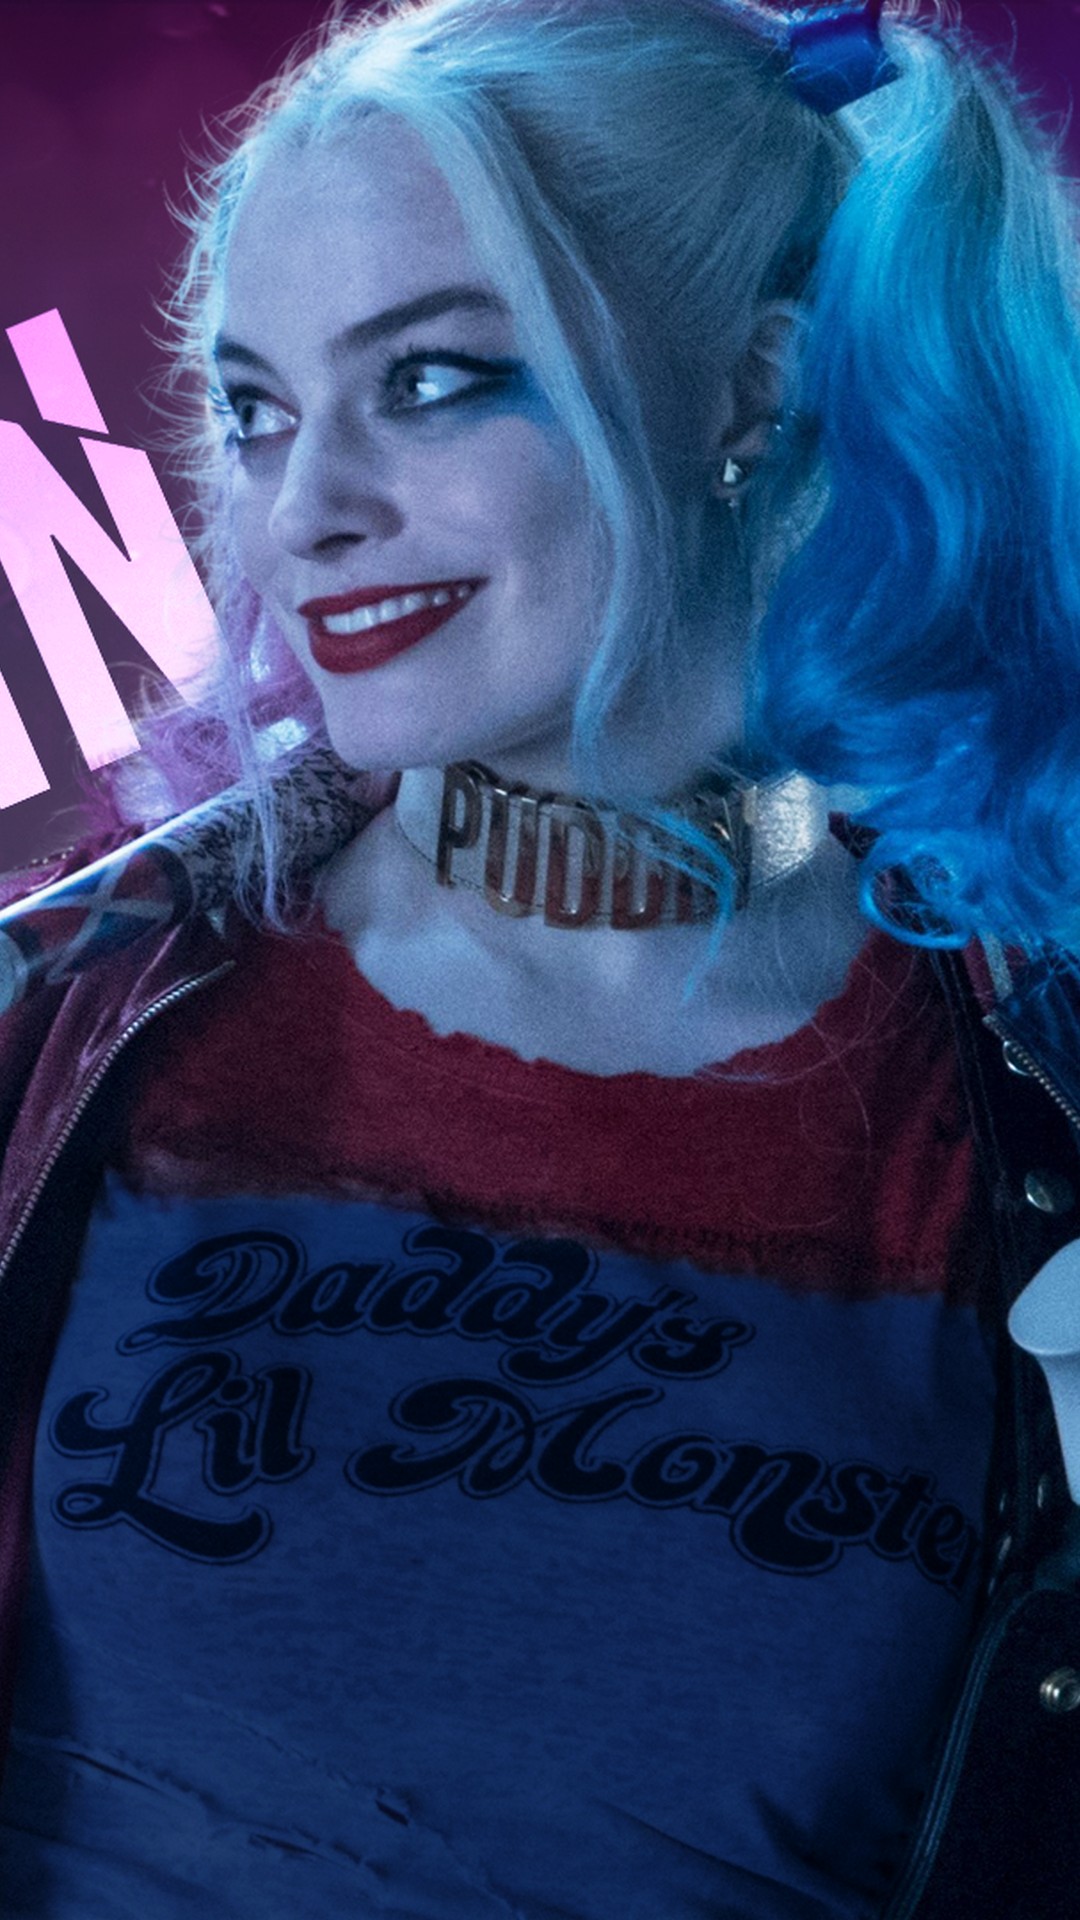 Harley Quinn Wallpaper For iPhone with resolution 1080X1920 pixel. You can make this wallpaper for your iPhone 5, 6, 7, 8, X backgrounds, Mobile Screensaver, or iPad Lock Screen